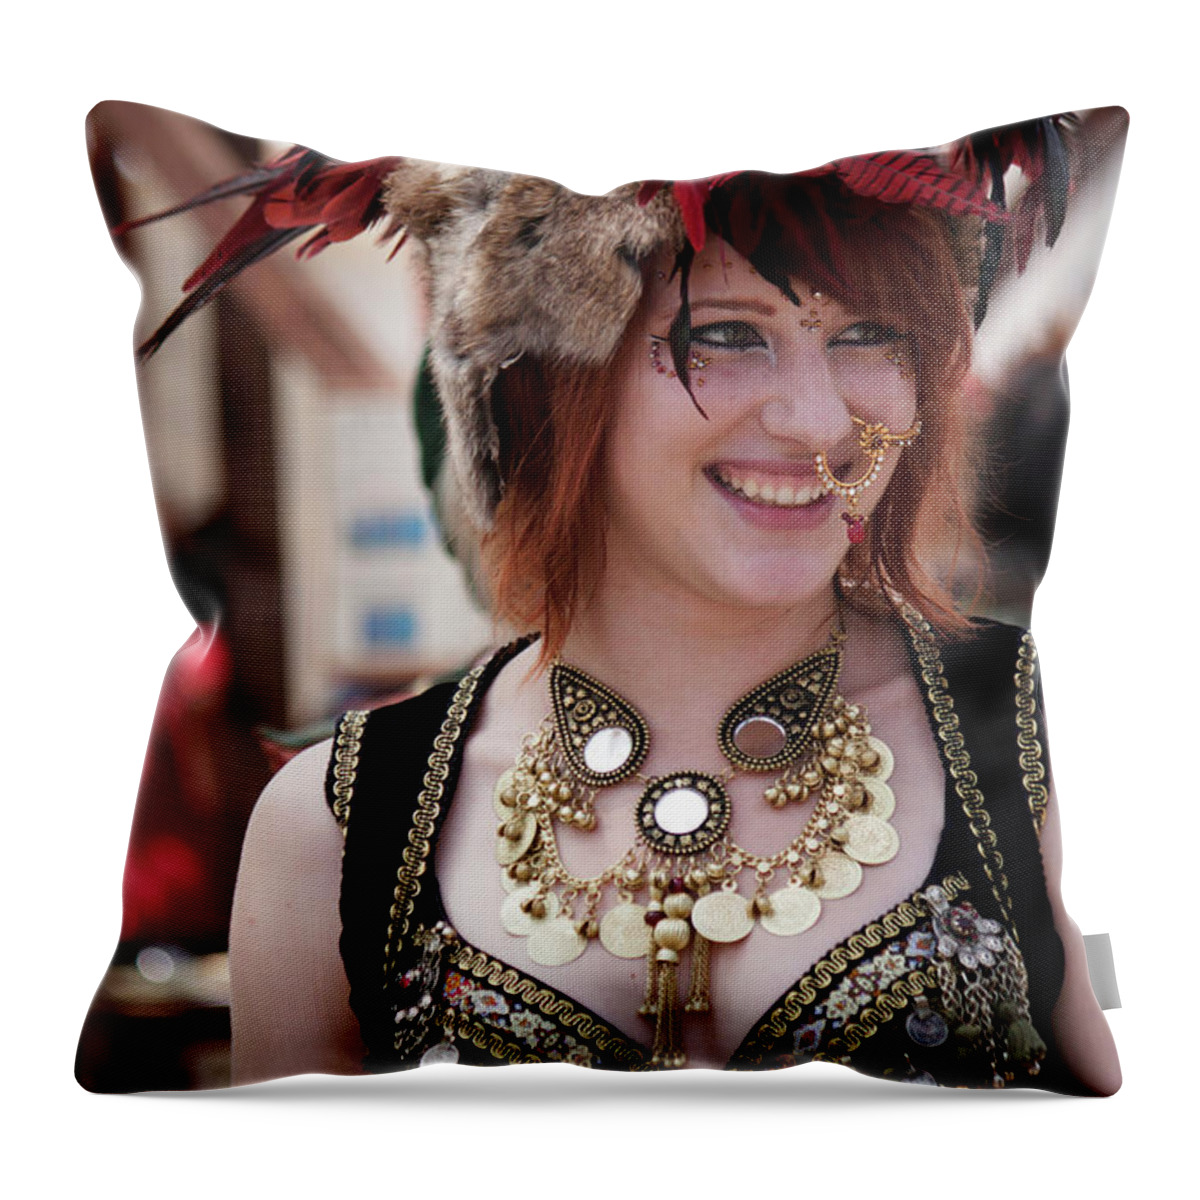 Reinanssance Girl Throw Pillow featuring the photograph Renaissance Girl by Ivete Basso Photography